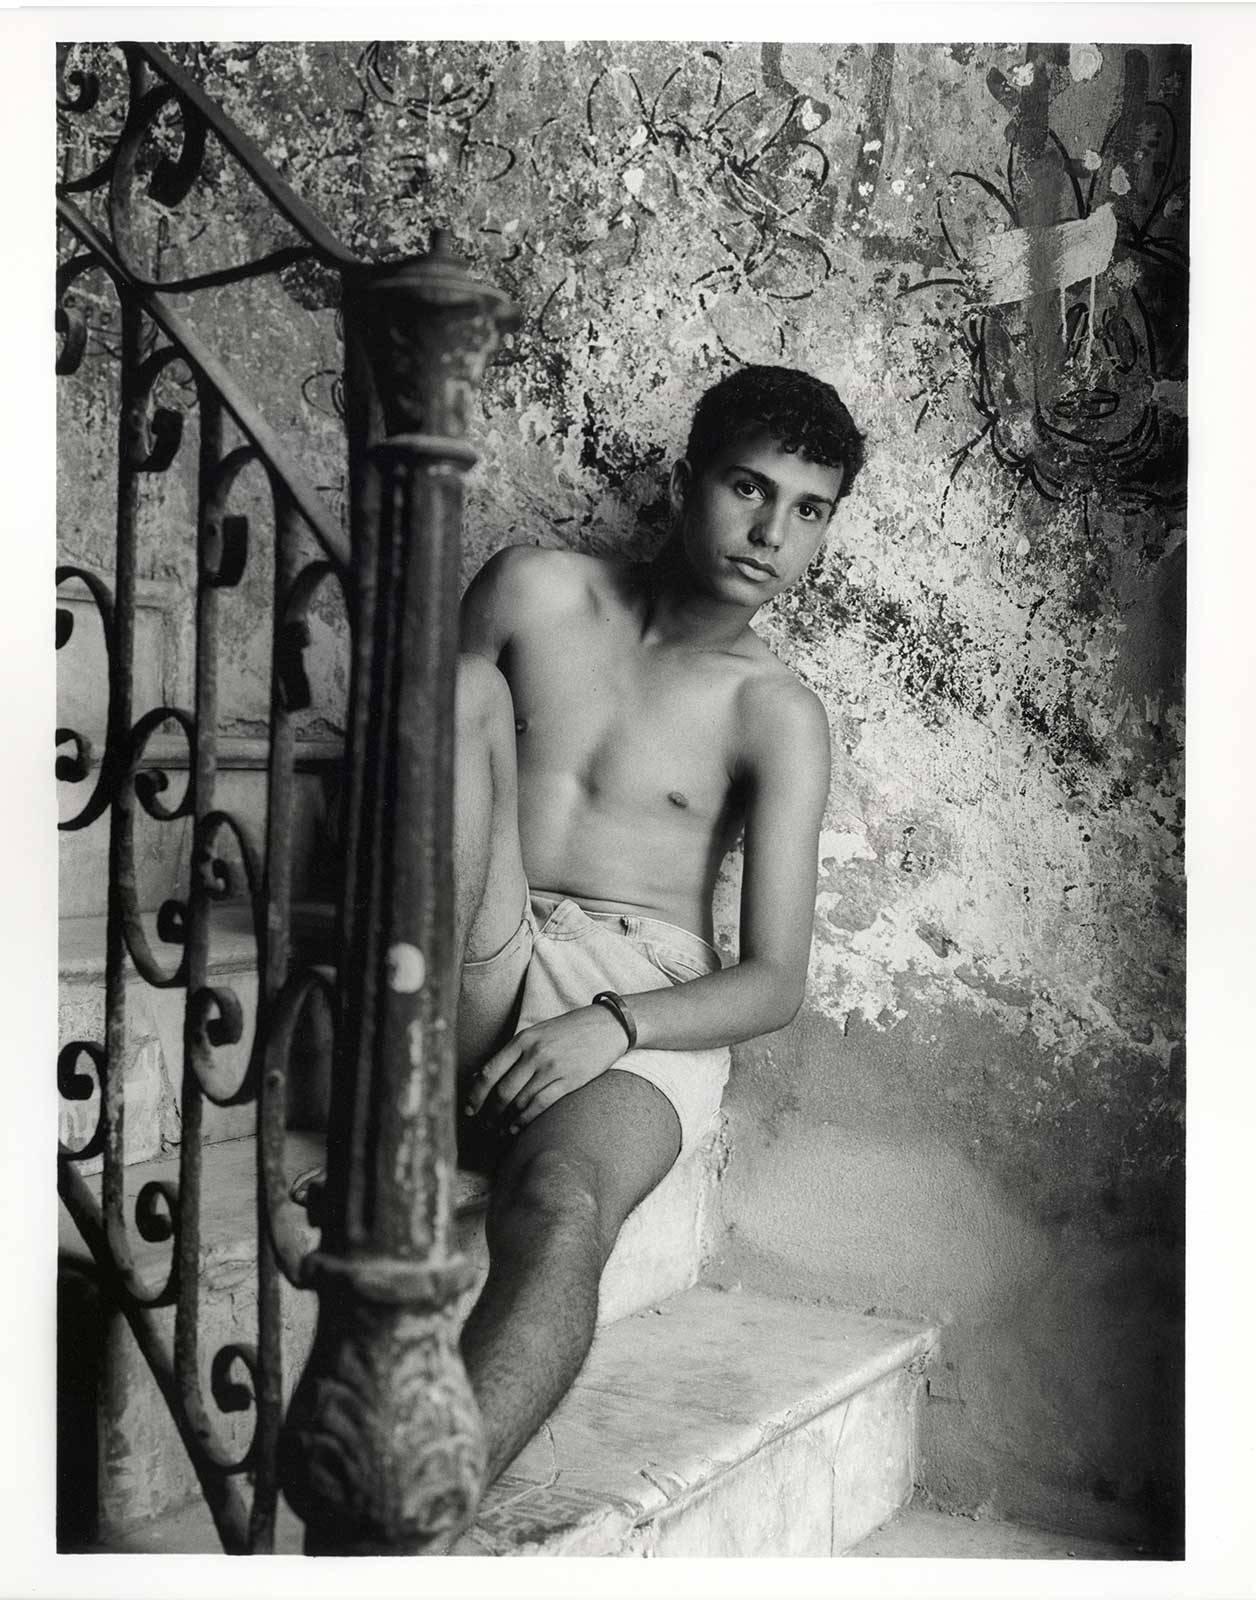 Benno Thoma Nude Photograph - Jose, Cuba (shirtless teen boy in elegantly decadent architectural stairway)